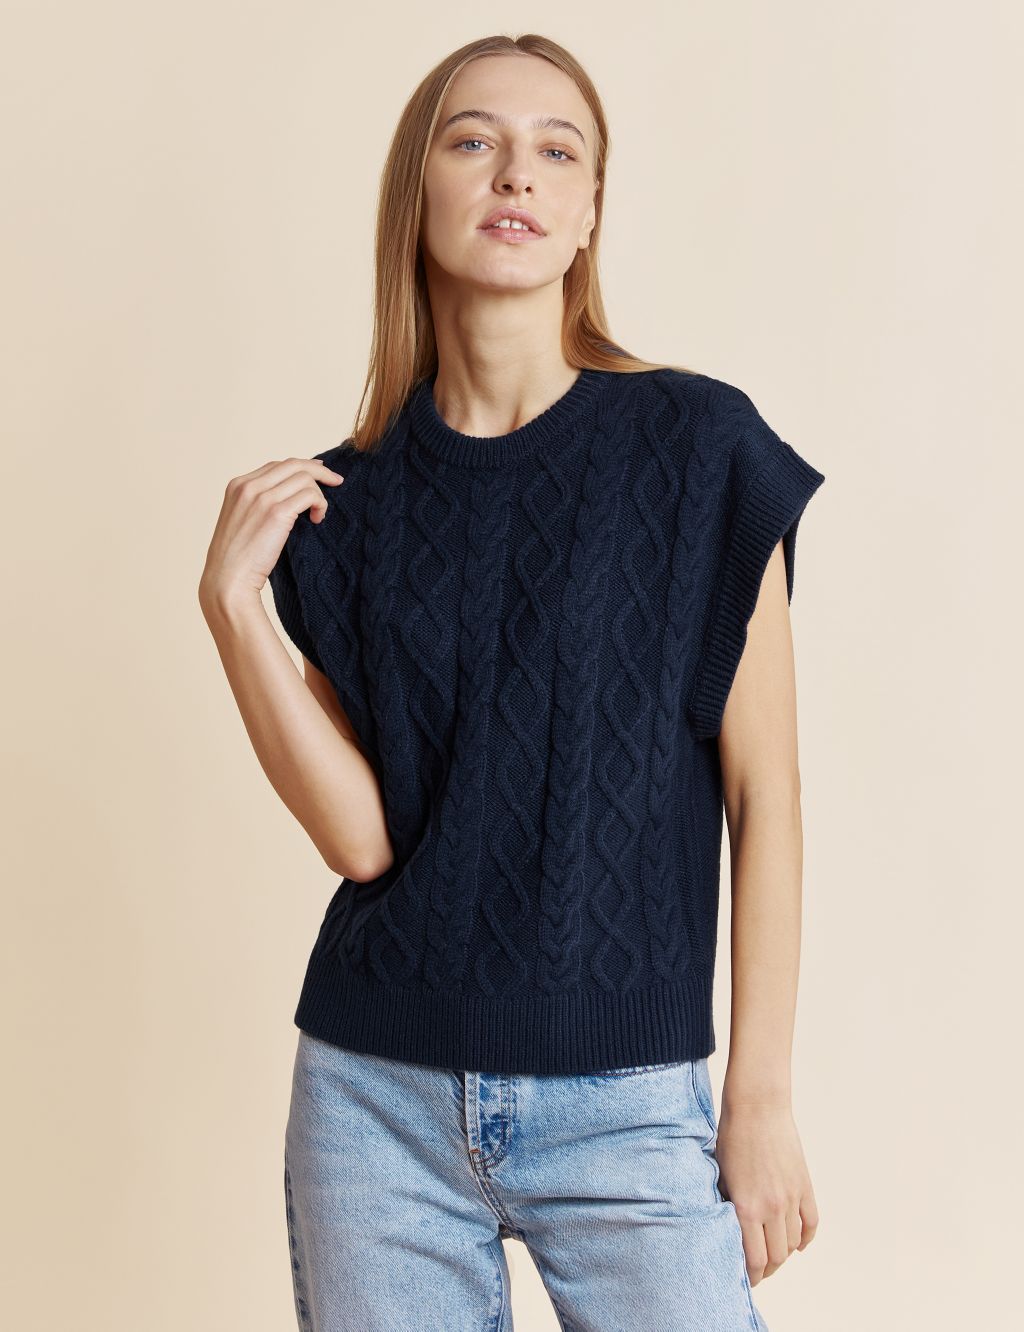 Cable Knit Sleeveless Jumper with Wool image 1